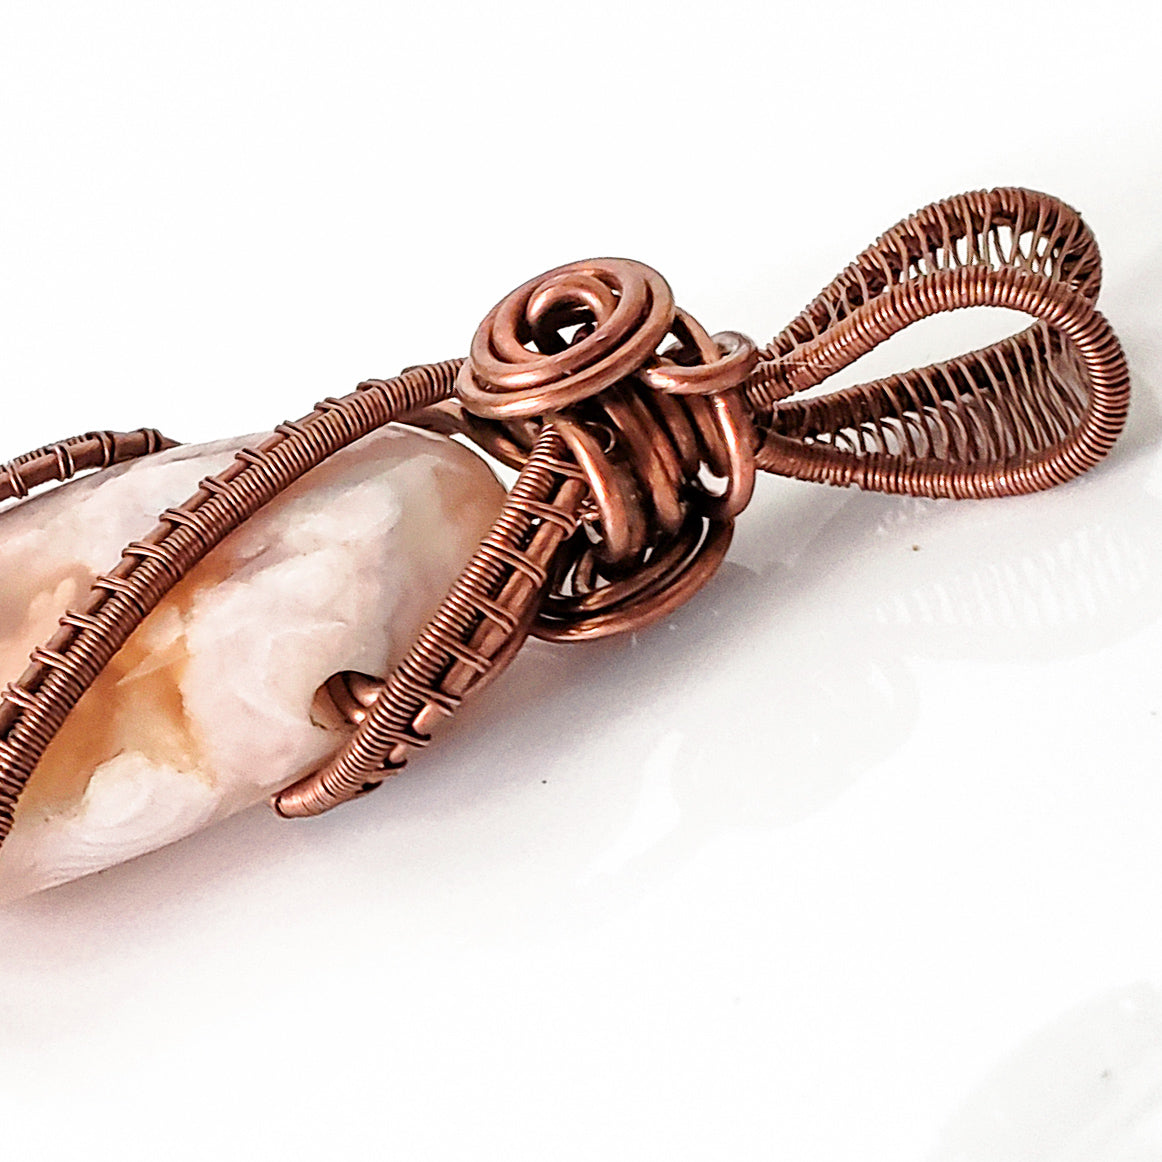 Close up of Antique Copper weaving on the Cherry Blossom Agate - BellaChel Jeweler